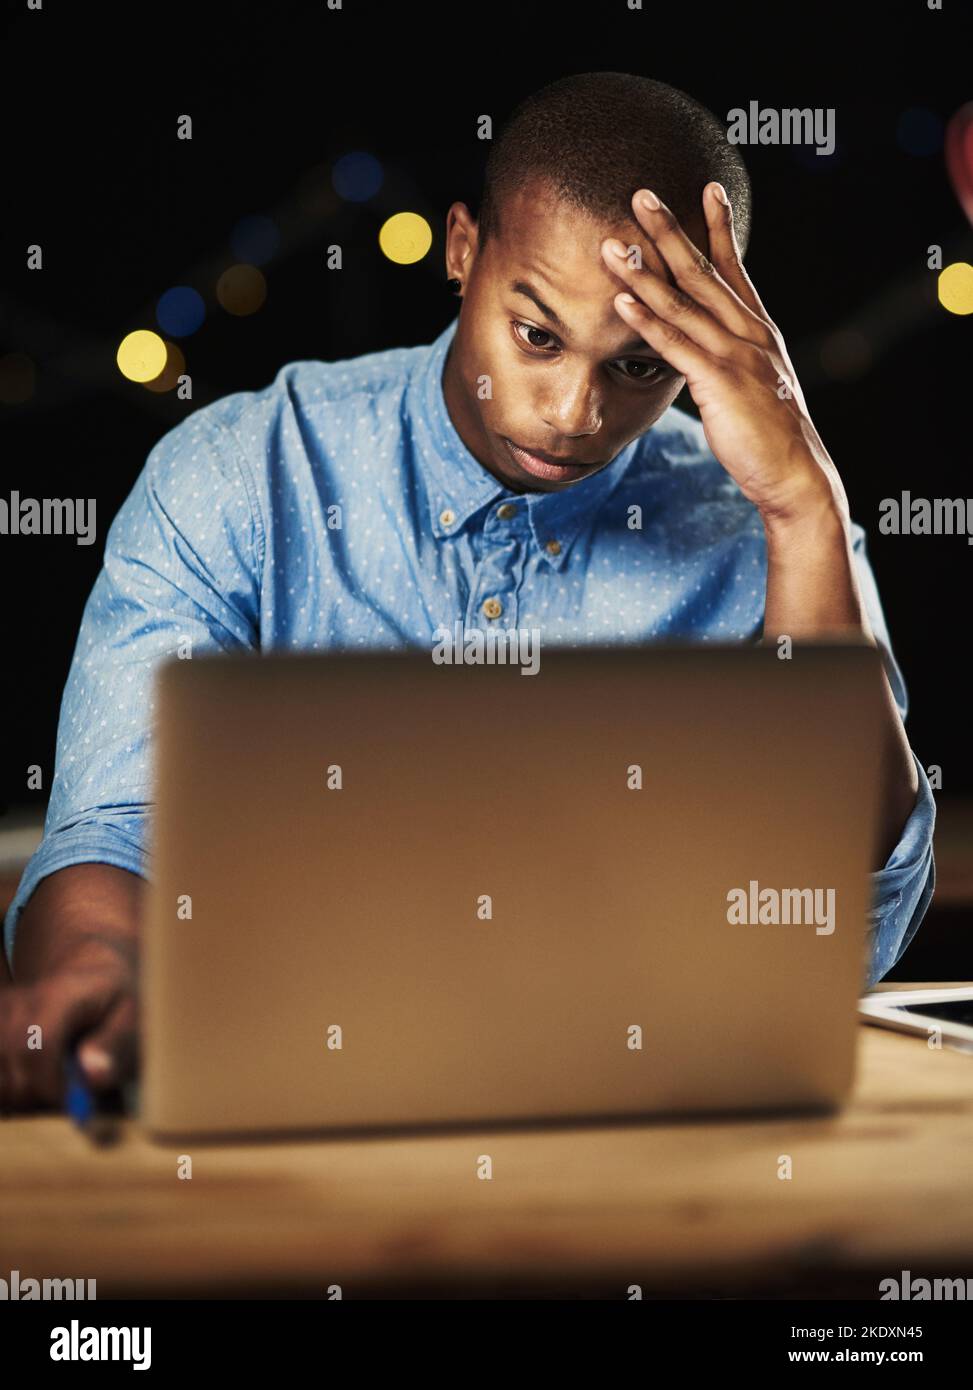 The deadline is looming. a young man looking stressed while working late night on his laptop. Stock Photo